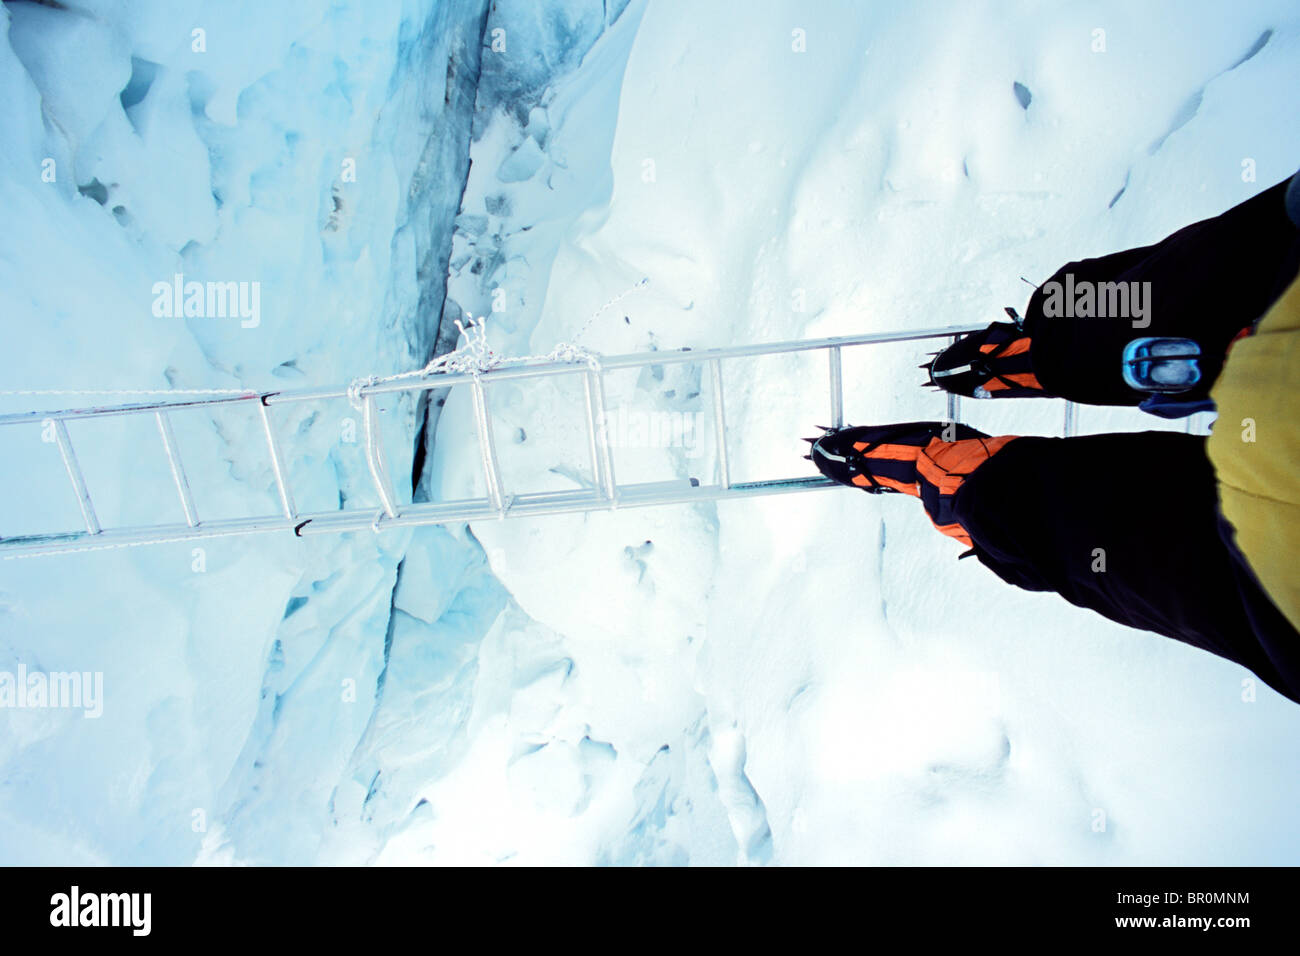 A climber on Mount Everest crossing a crevasse on a ladder in the Khumbu icefall in Nepal. Stock Photo